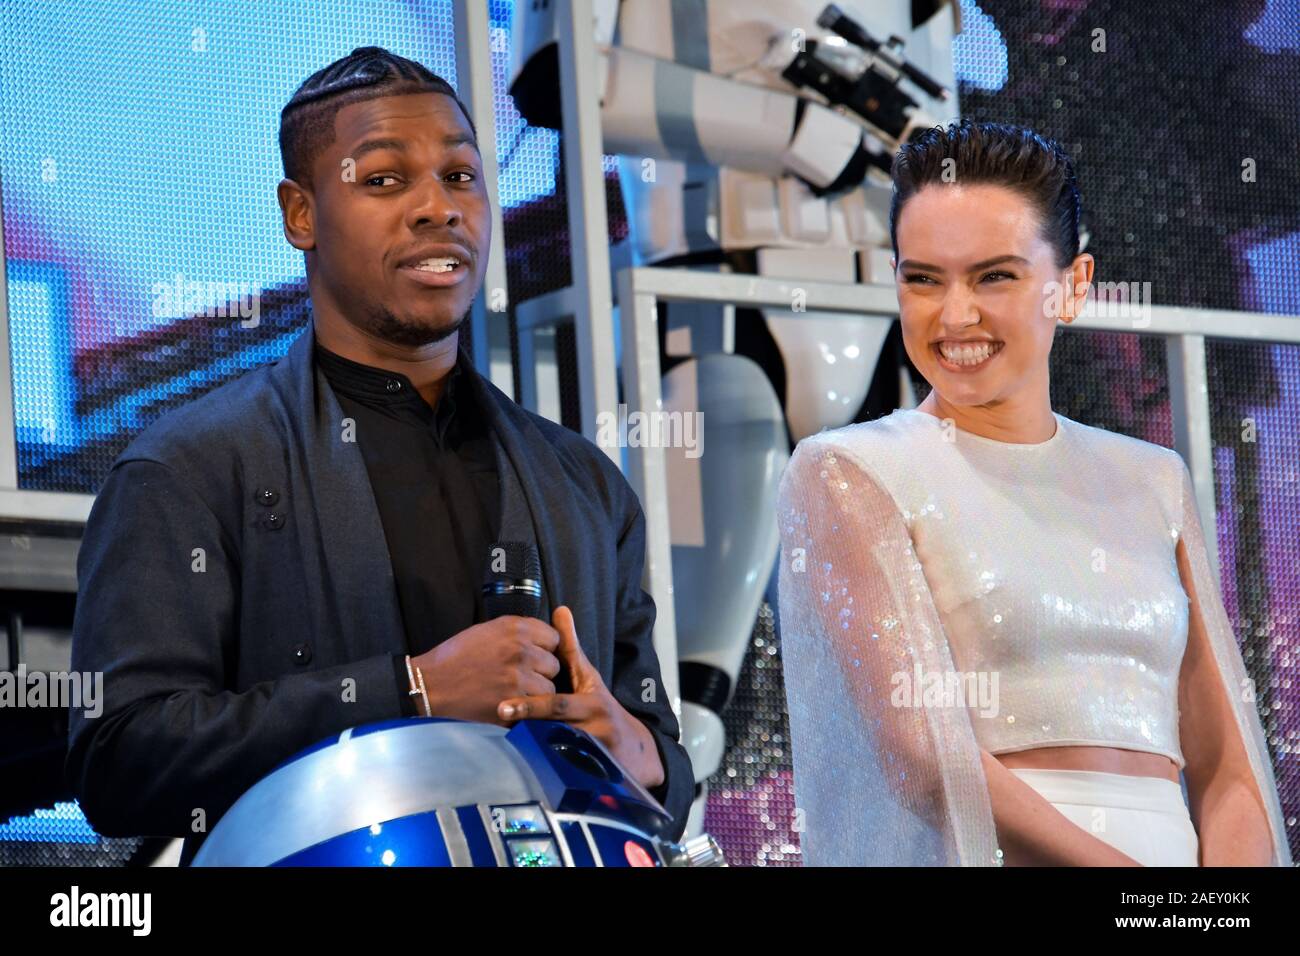 Tokyo, Japan. 11th Dec, 2019. Actor John Boyega(L) and Daisy Ridley attend the Japan premiere for the film 'Star Wars: The Rise of Skywalker' in Tokyo, Japan on Wednesday, December 11, 2019. This film will open on December 20th in the world. Prior to this, special screening will be held at Hokkaido, Tokyo, Aichi, Osaka and Fukuoka in Japan on December 19th. Photo by Keizo Mori/UPI Credit: UPI/Alamy Live News Stock Photo